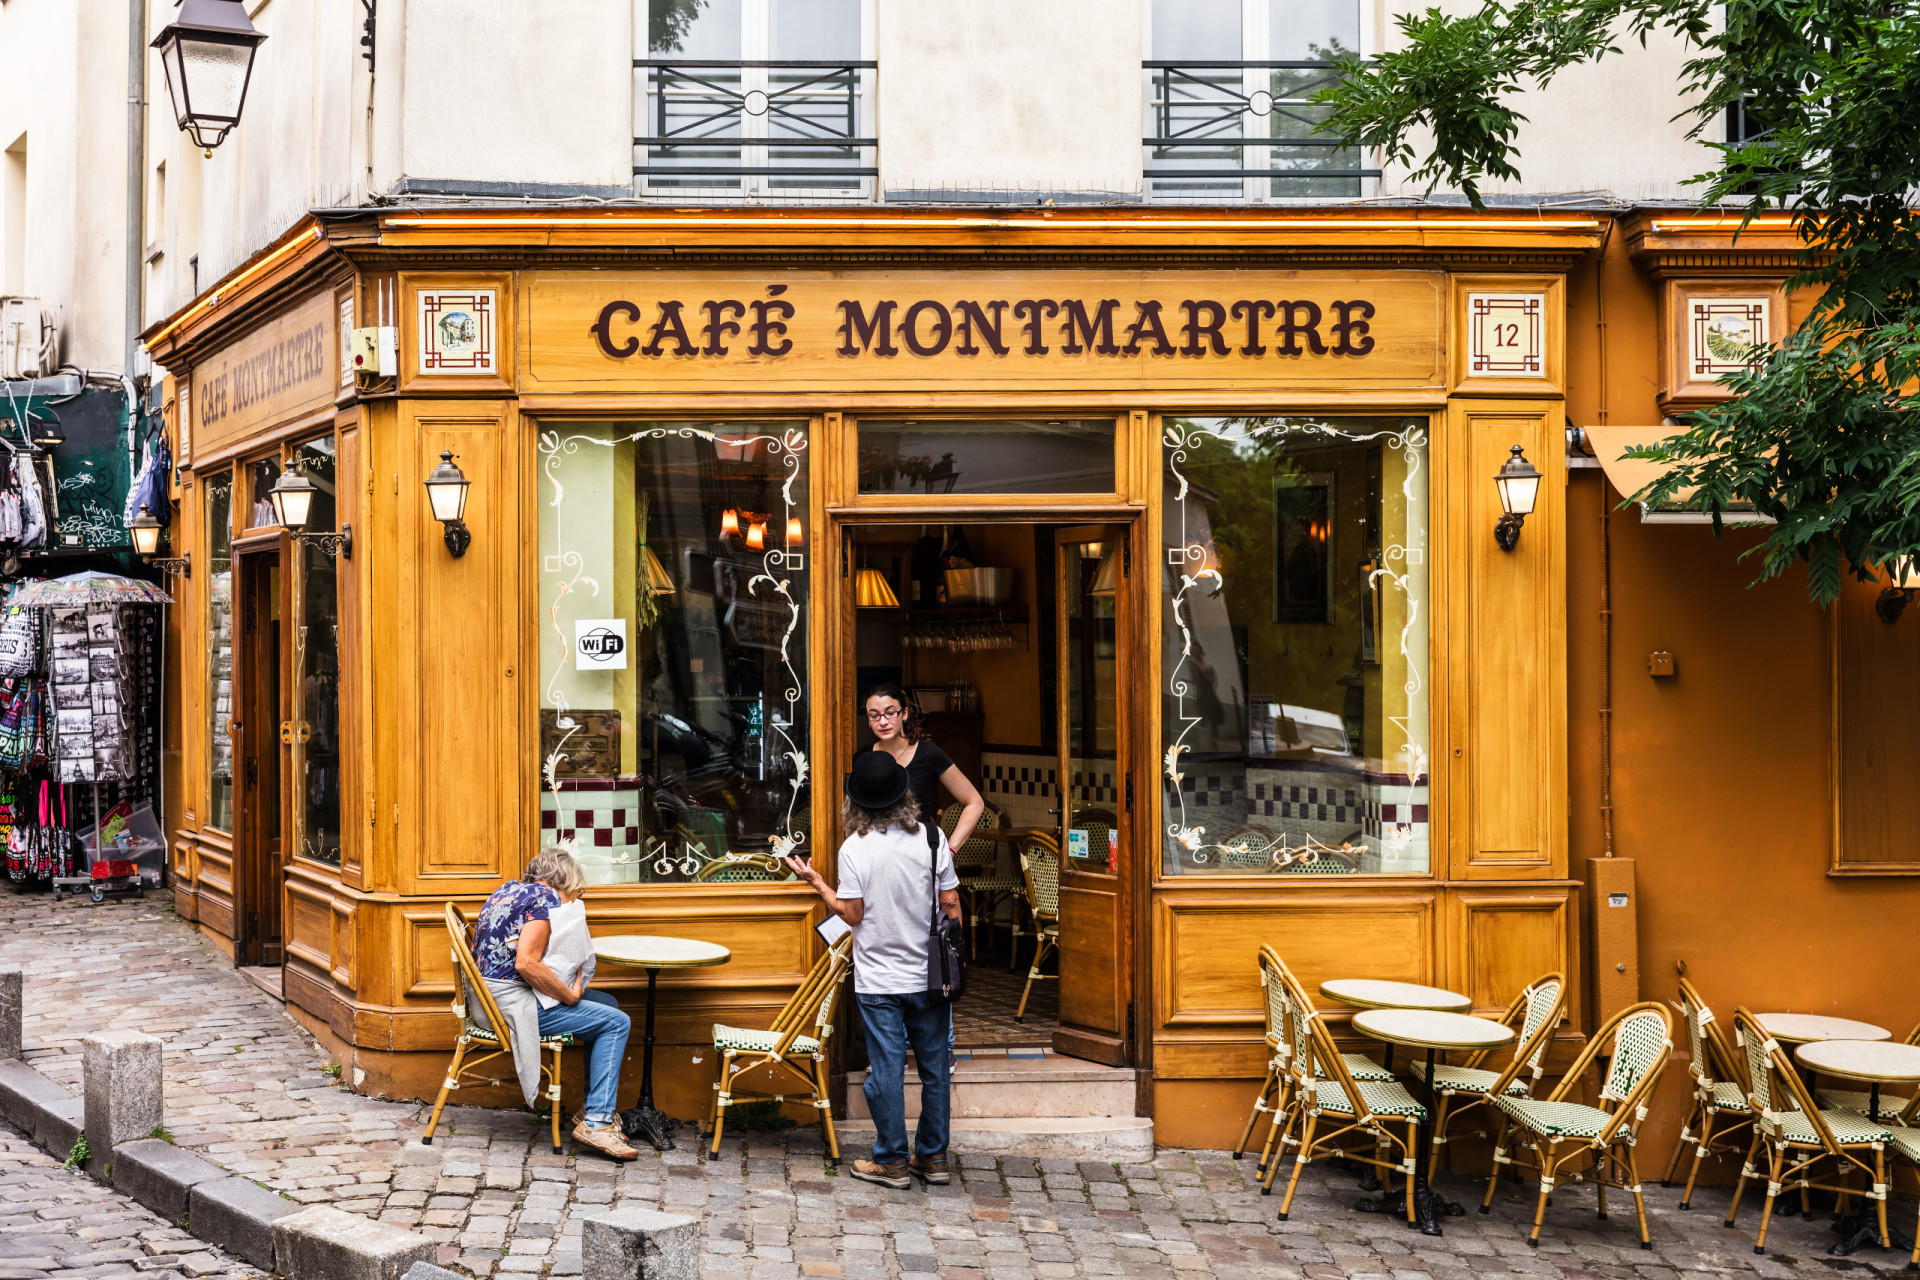 <p>Even if Paris syndrome sounds scary, Paris is still a wonderful city. Tourists should simply remember that, like any city, it will have its pros and cons.</p><p><a href="https://www.msn.com/en-us/community/channel/vid-7xx8mnucu55yw63we9va2gwr7uihbxwc68fxqp25x6tg4ftibpra?cvid=94631541bc0f4f89bfd59158d696ad7e">Follow us and access great exclusive content every day</a></p>